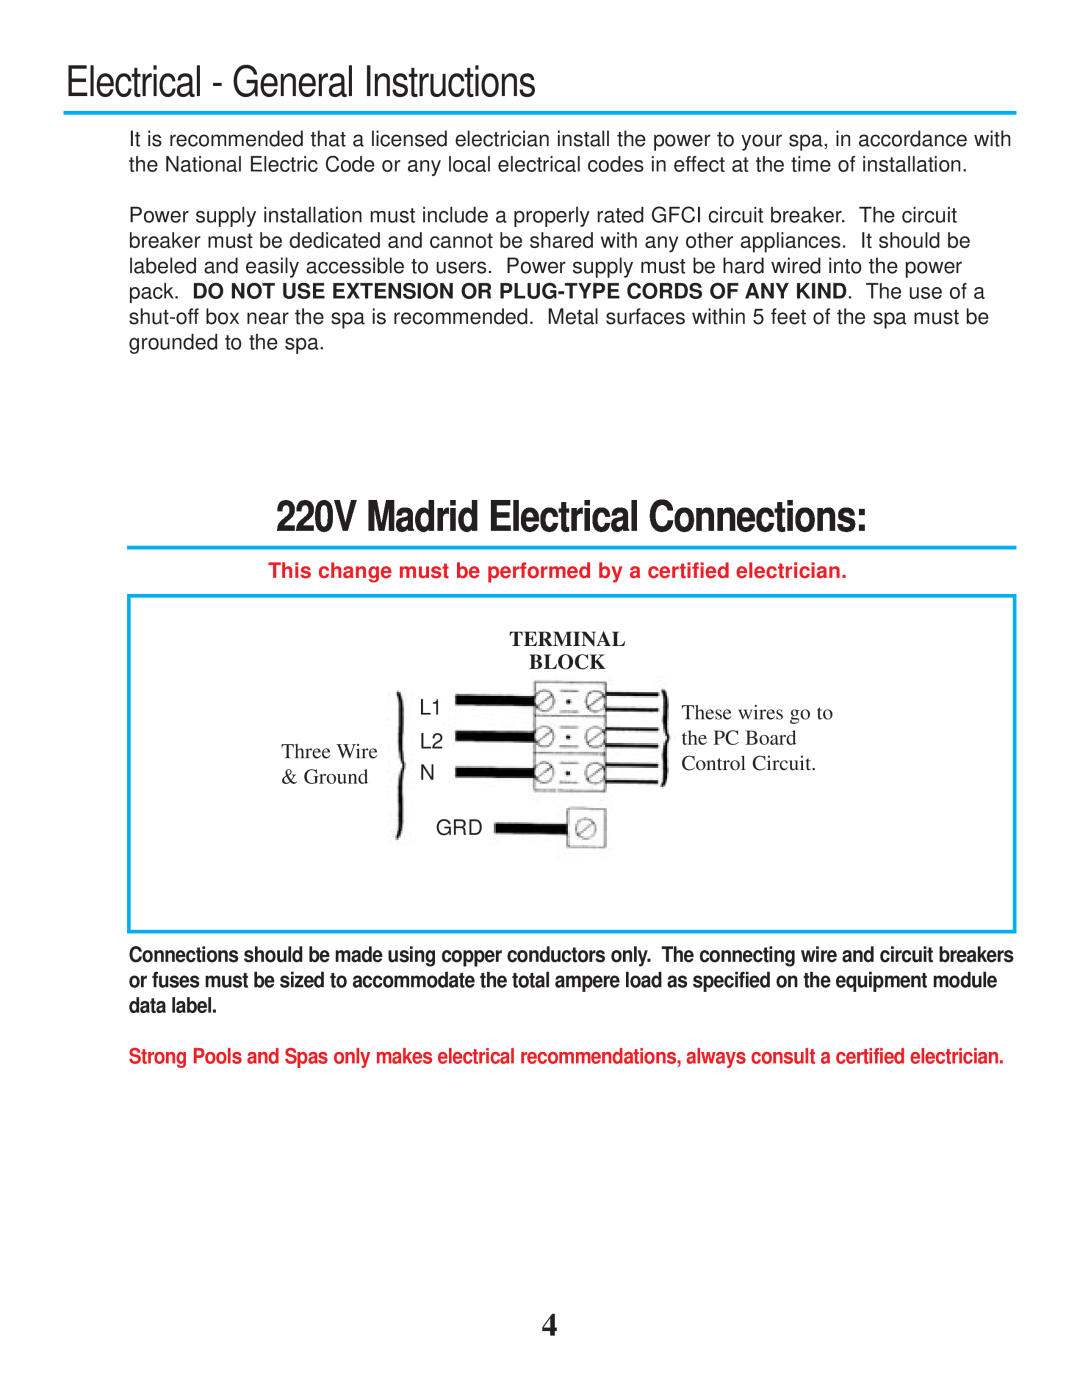 Strong Pools and Spas Electrical - General Instructions, 220V Madrid Electrical Connections, Three Wire, Ground 